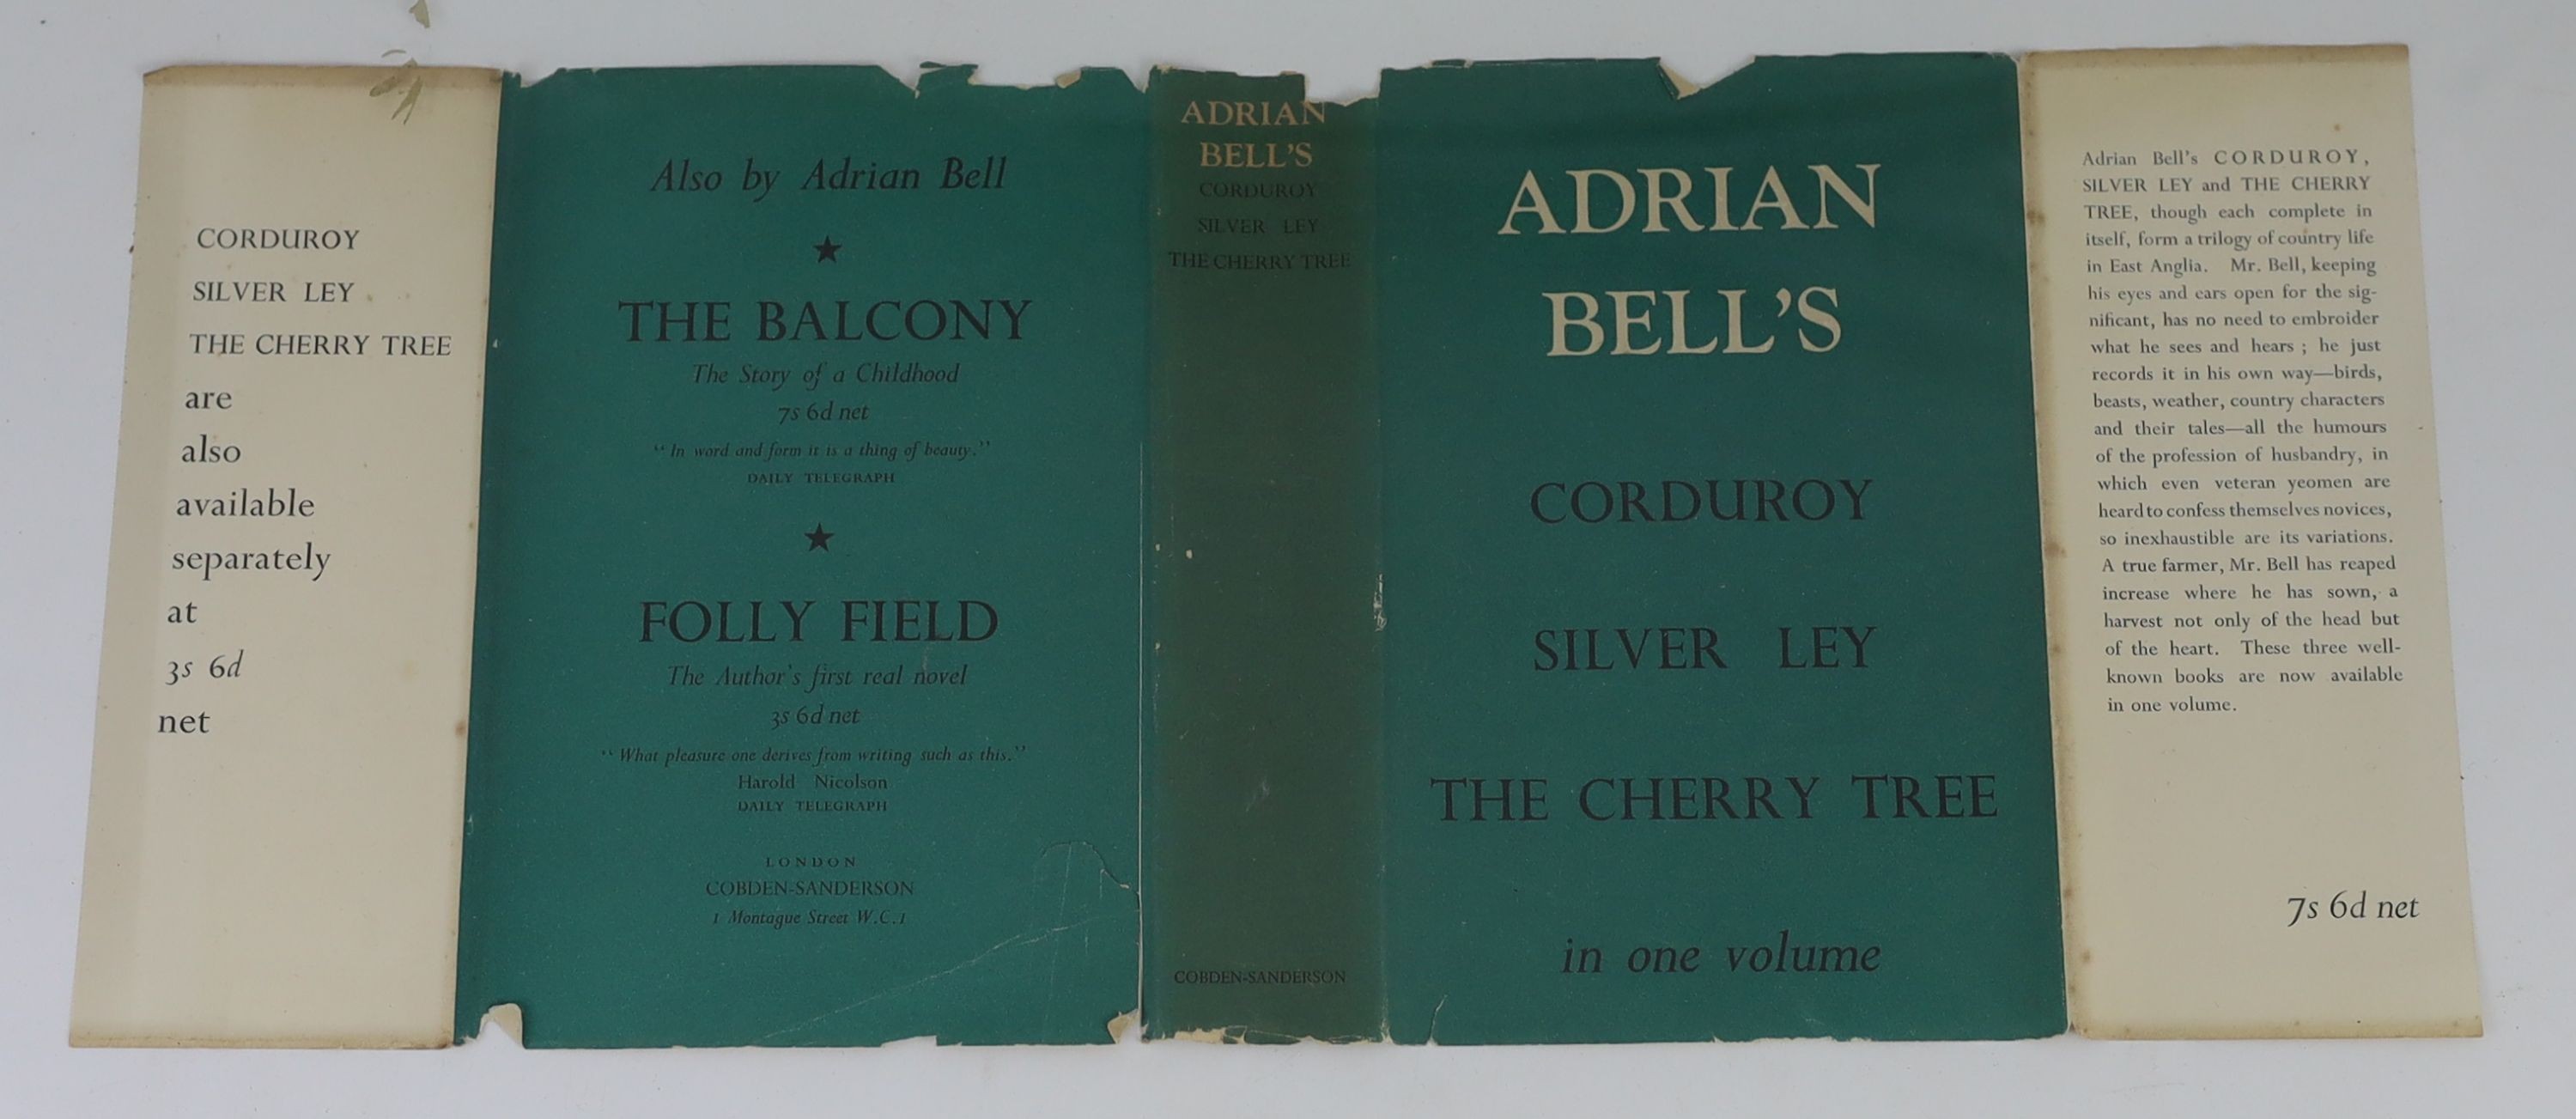 Bell, Adrian - Corduroy. Silver Ley. The Cherry Tree, 1st edition, 8vo, cloth with unclipped d/j, signed with presentation inscription, ‘’I am so glad you like this book. With best wishes’’, Cobden-Sanderson, London, 193